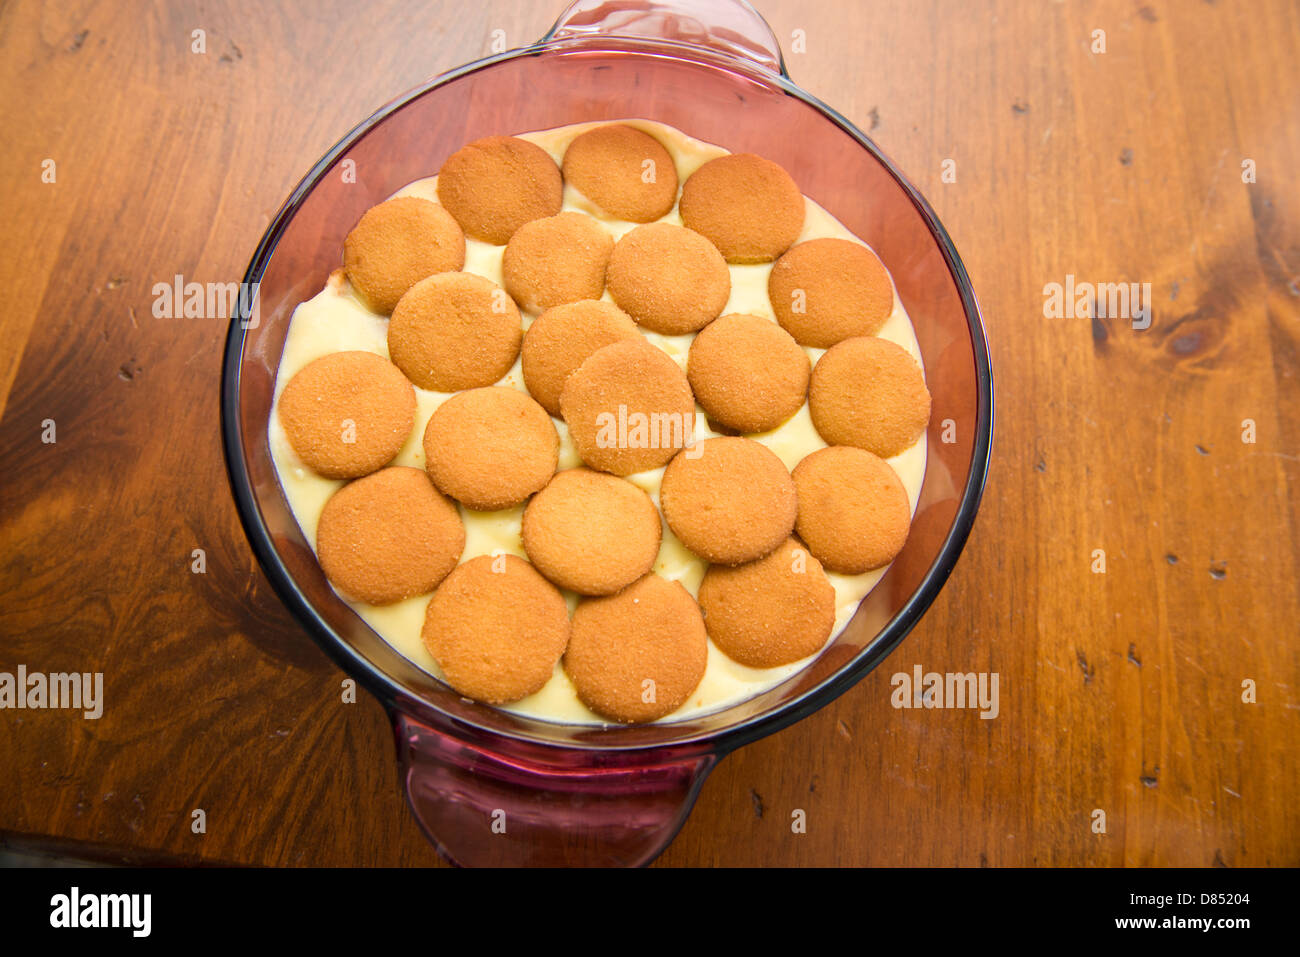 Banana pudding, homemade in a casserole dish. Made with vanilla wafers,vanilla pudding and sliced bananas. On a wooden table. Oklahoma, USA. Stock Photo